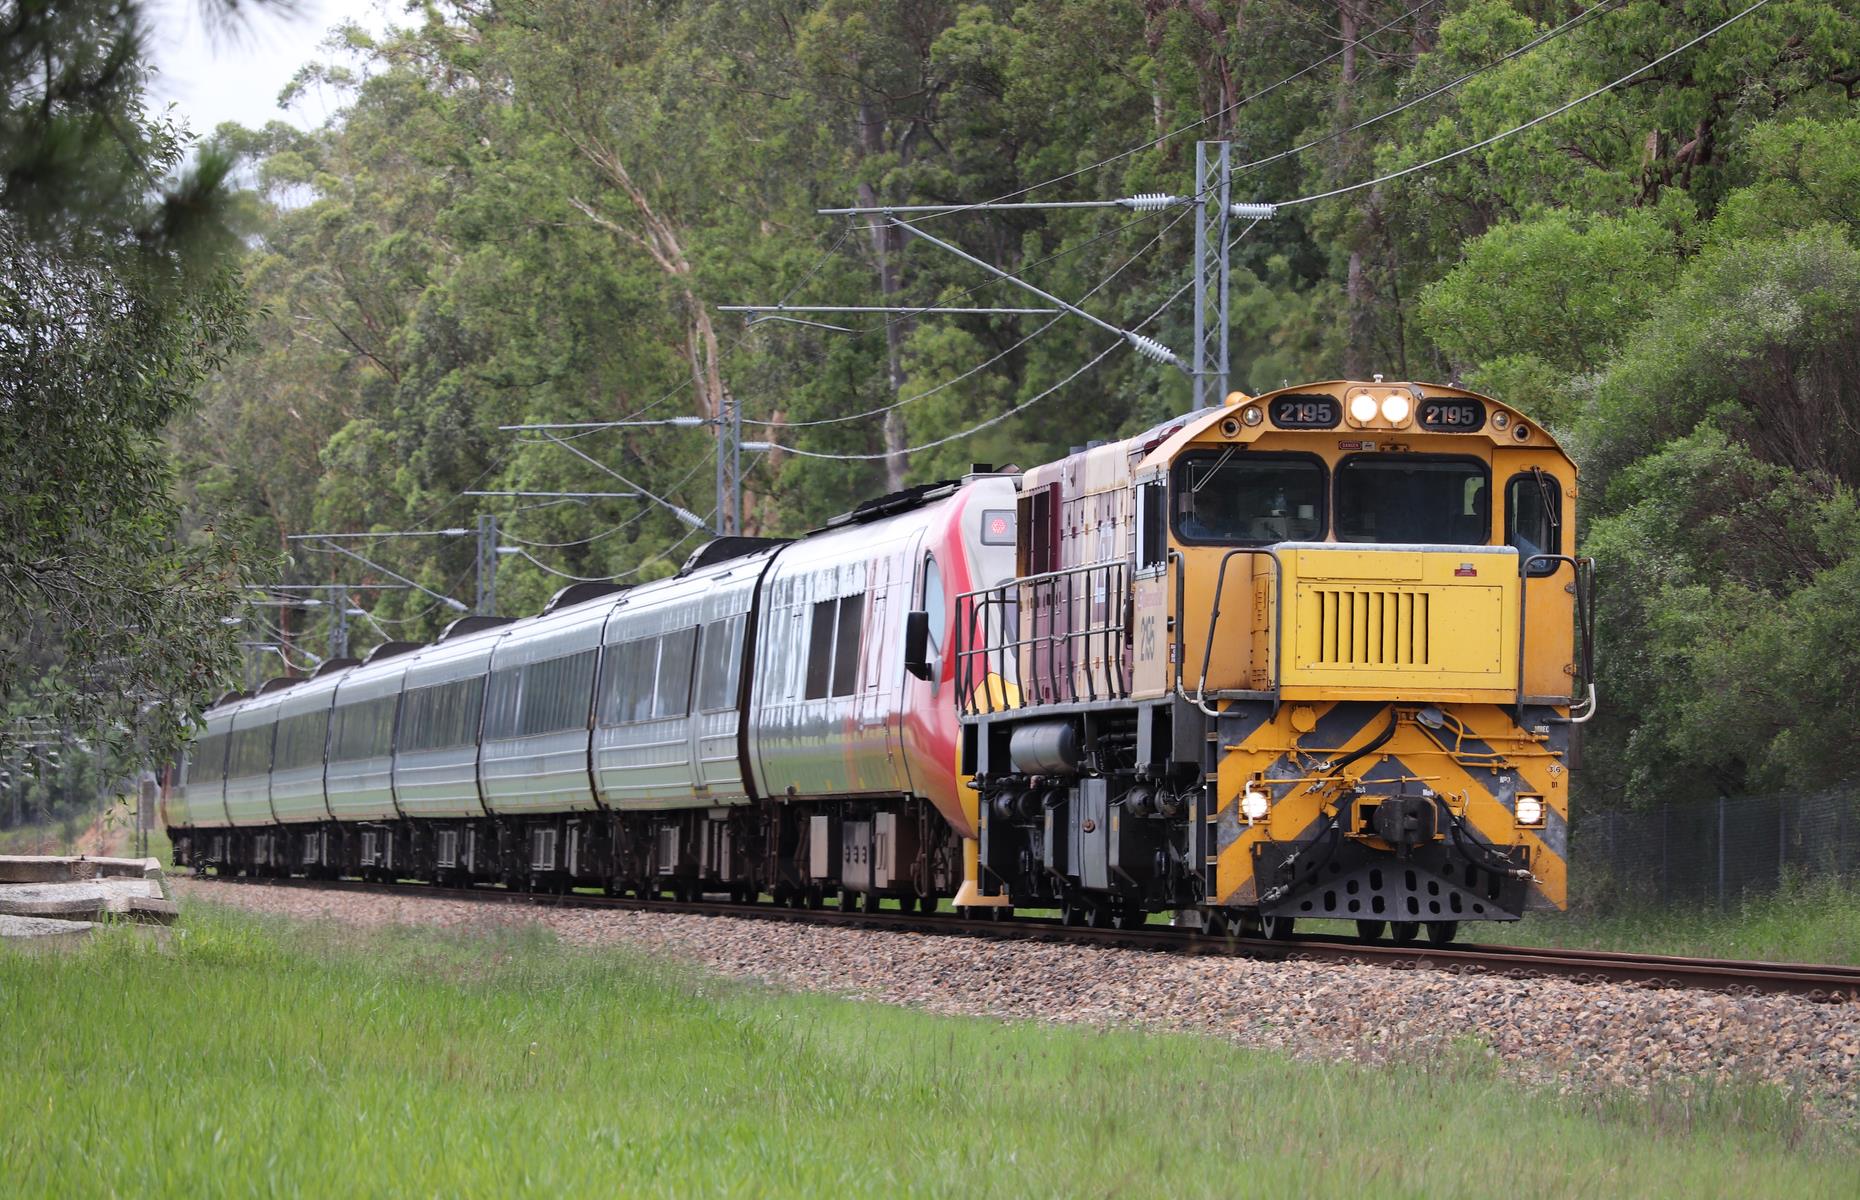 <p>Replacing the much-loved Sunlander in 2014, the <a href="https://www.queenslandrailtravel.com.au/railexperiences/ourtrains/spiritofqueensland">Spirit of Queensland</a> travels 1,044 miles (1,681km) over 25 hours, connecting Brisbane and Cairns. The long-distance rail service passes through gorgeous tropical landscapes and connects passengers with coastal Queensland's spectacular destinations including hop-off points to explore the Great Barrier Reef and the Whitsundays. </p>